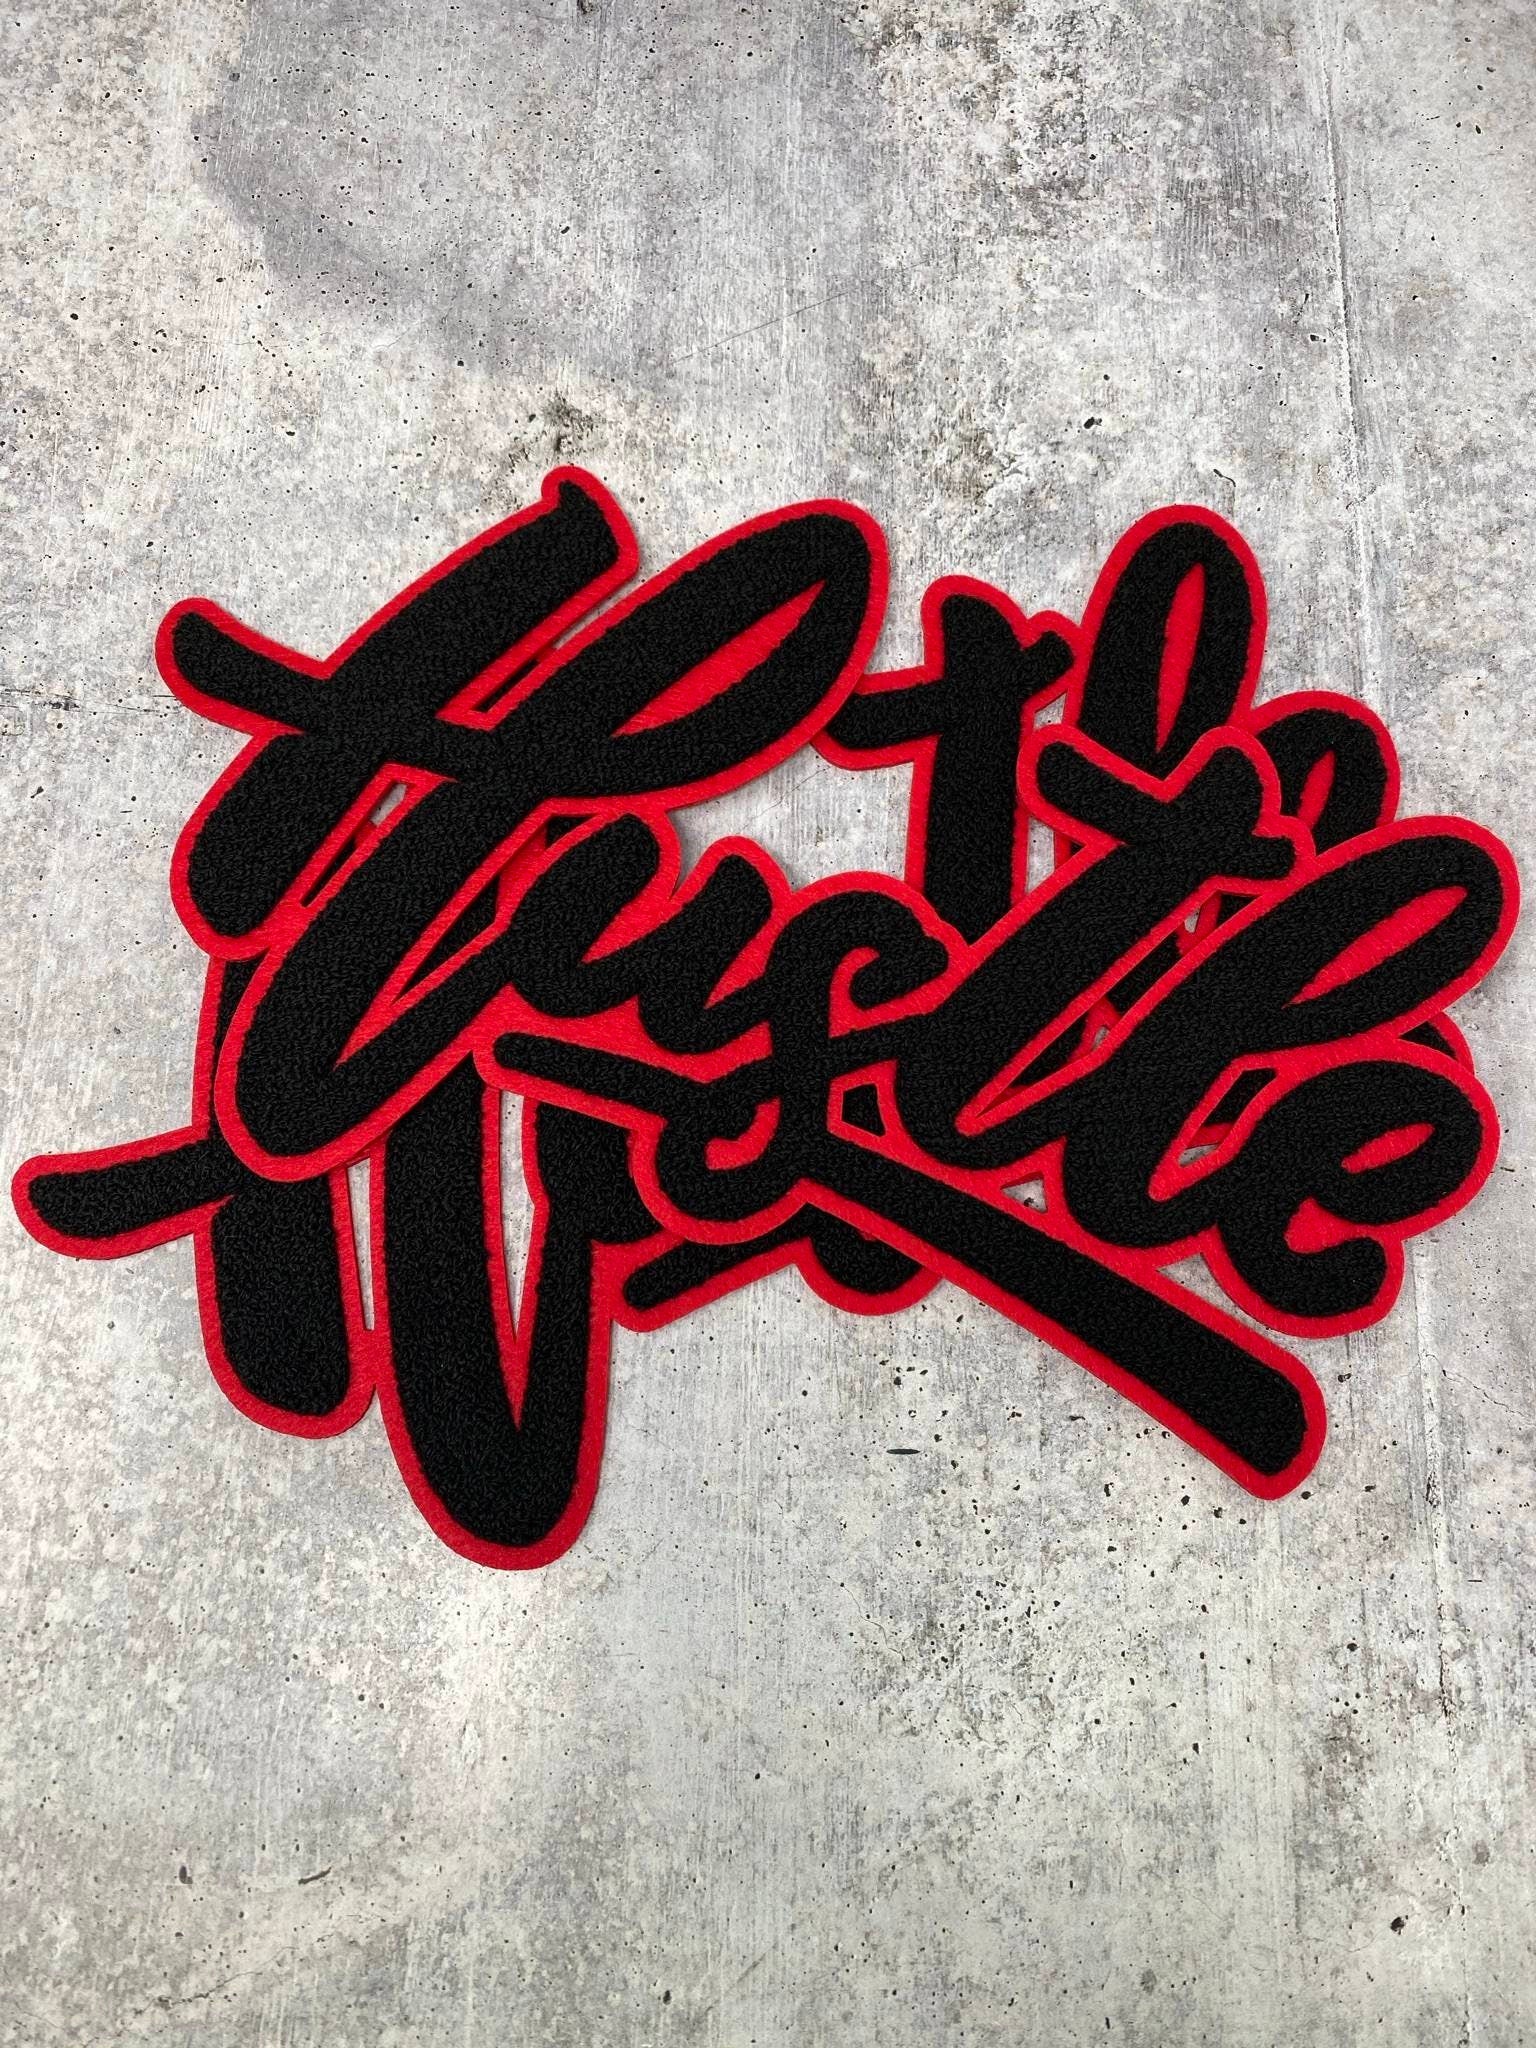 Exclusive, Black & Red "Hustle" Chenille Patch (iron-on) Size 10"x8", Varsity Patch for Denim Jacket, Shirts and Hoodies, Large Patch